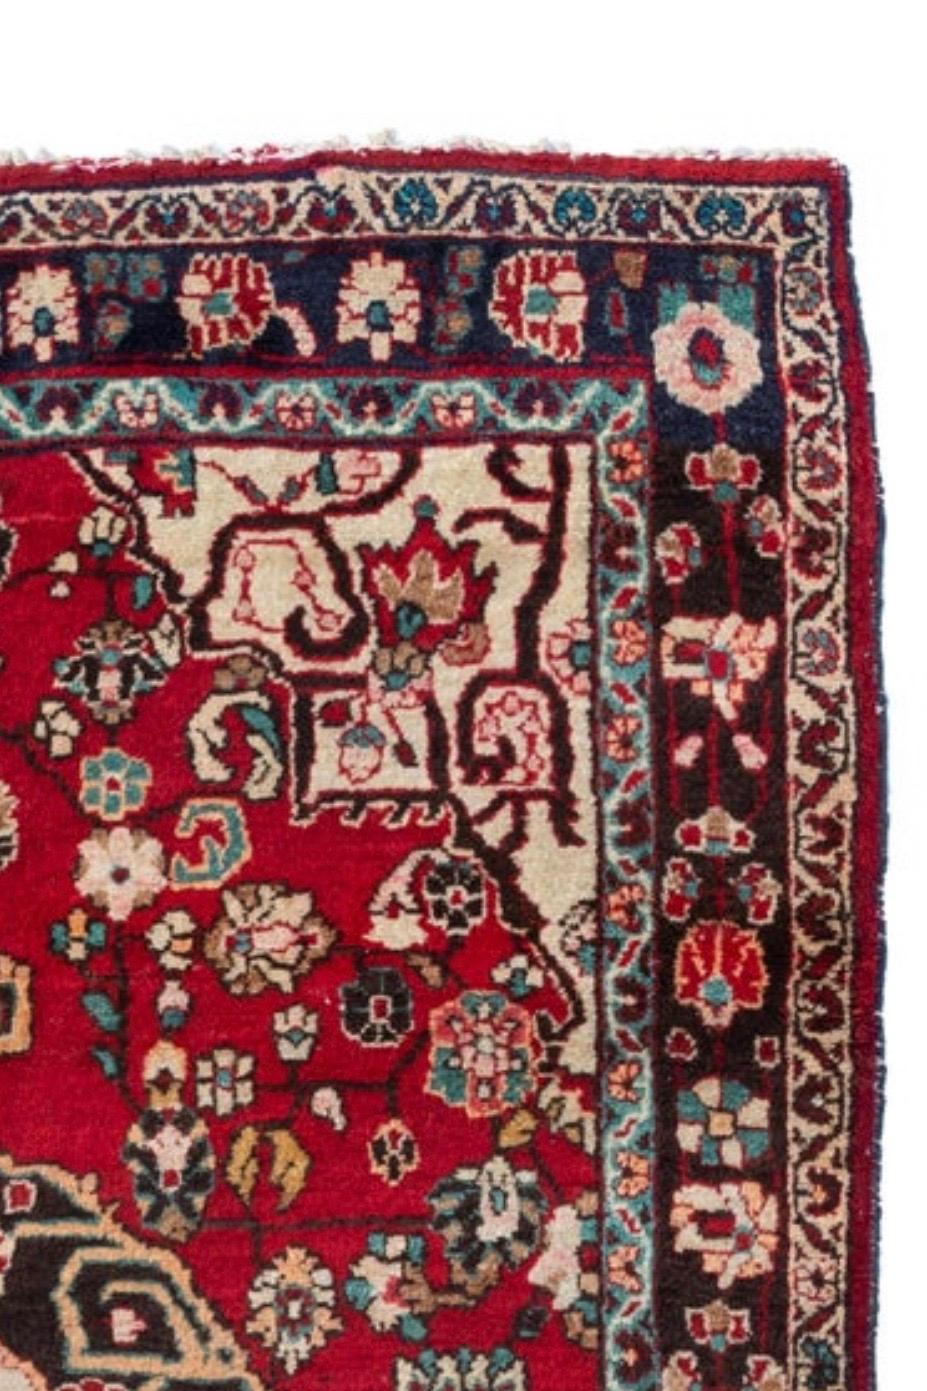 Sarouk is a small village and its neighboring villages in Northwestern Iran. Most Sarouk carpets follow a very distinctive design and is depended on floral sprays and bouquets. 

This is a lovely vintage Sarouk carpet dating from the 1960s and